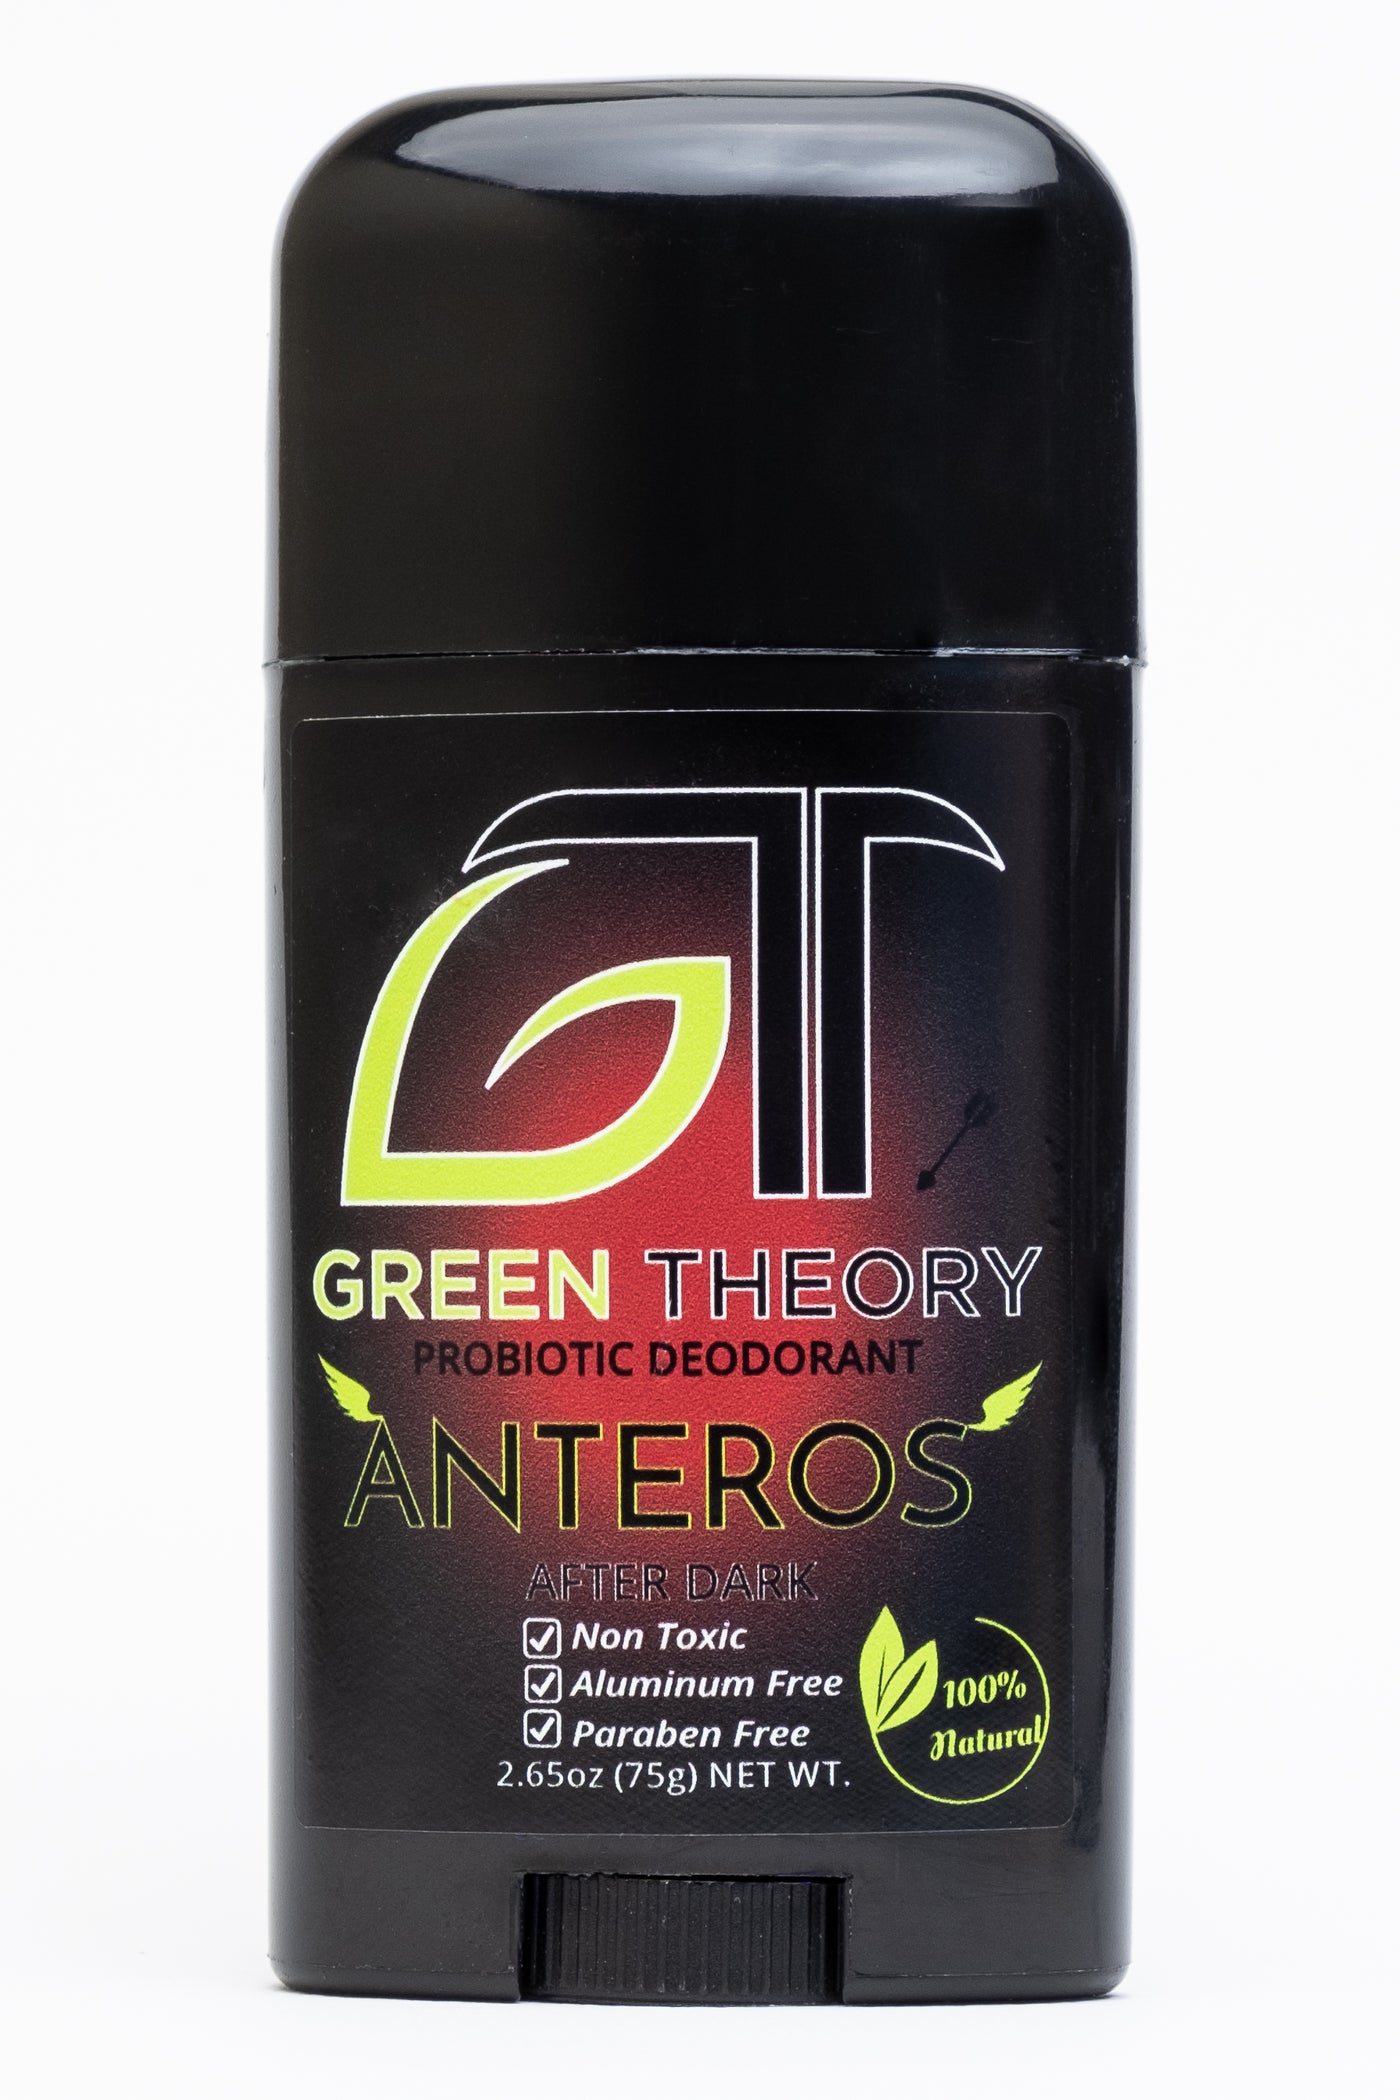 photo of the front of green theory anteros probiotic deodorant for men. Product is in a shiny black plastic container. The front label has a background of a red orb with a large GT logo. The G is shaped like a leaf. Under the logo is the brand name and Anteros with wings coming off the A and S